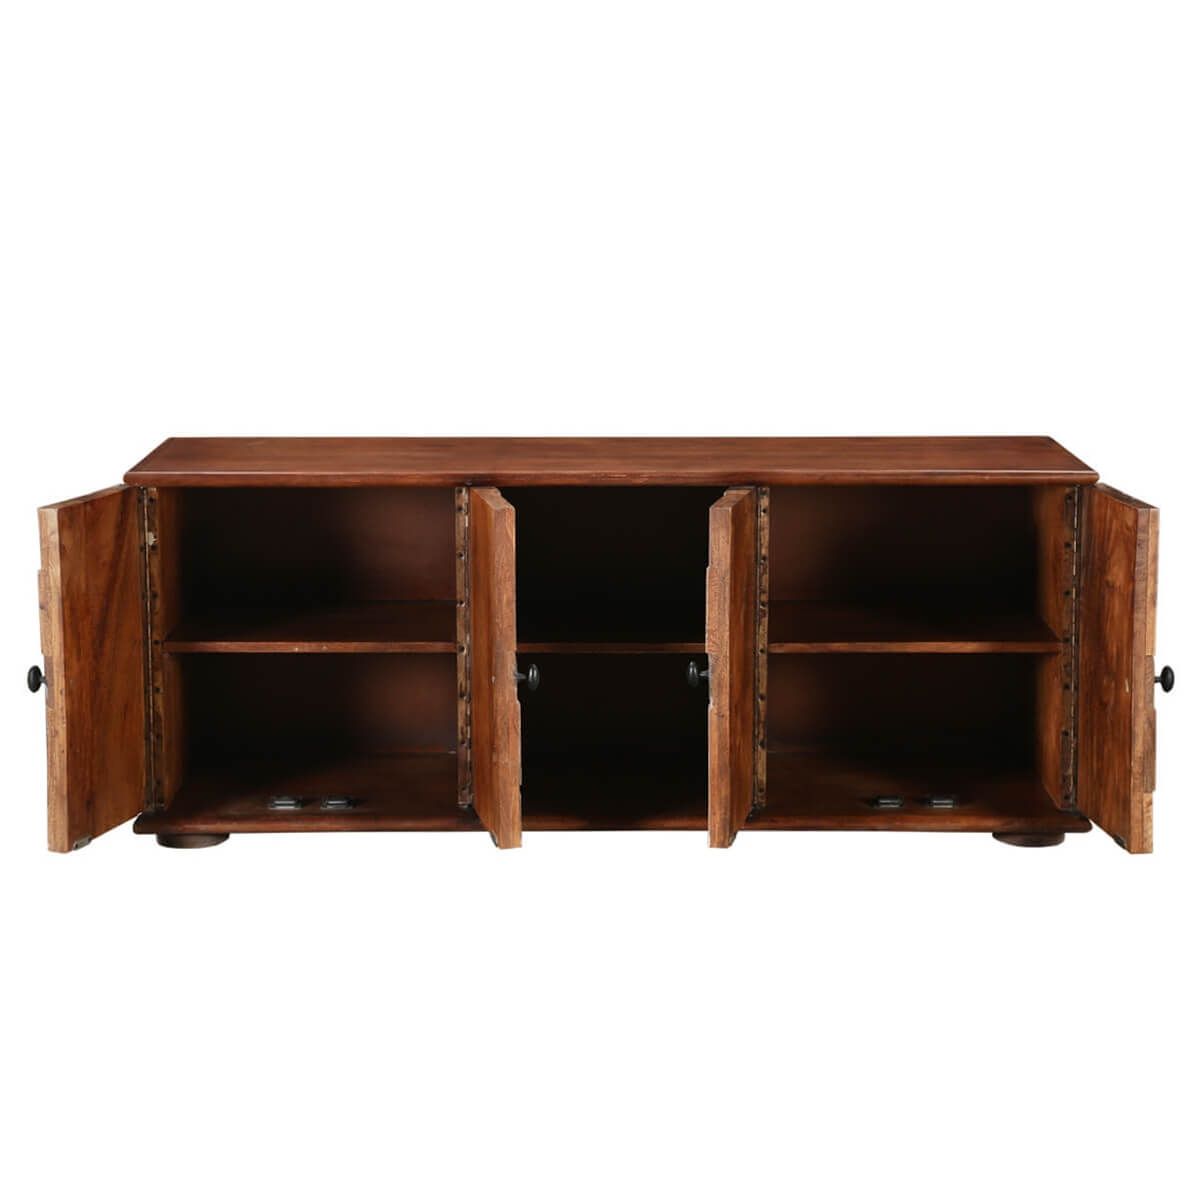 Riviera Rustic Mango Wood Tv Stand With Cabinet Shelves Pertaining To Mango Wood Tv Stands (View 13 of 15)